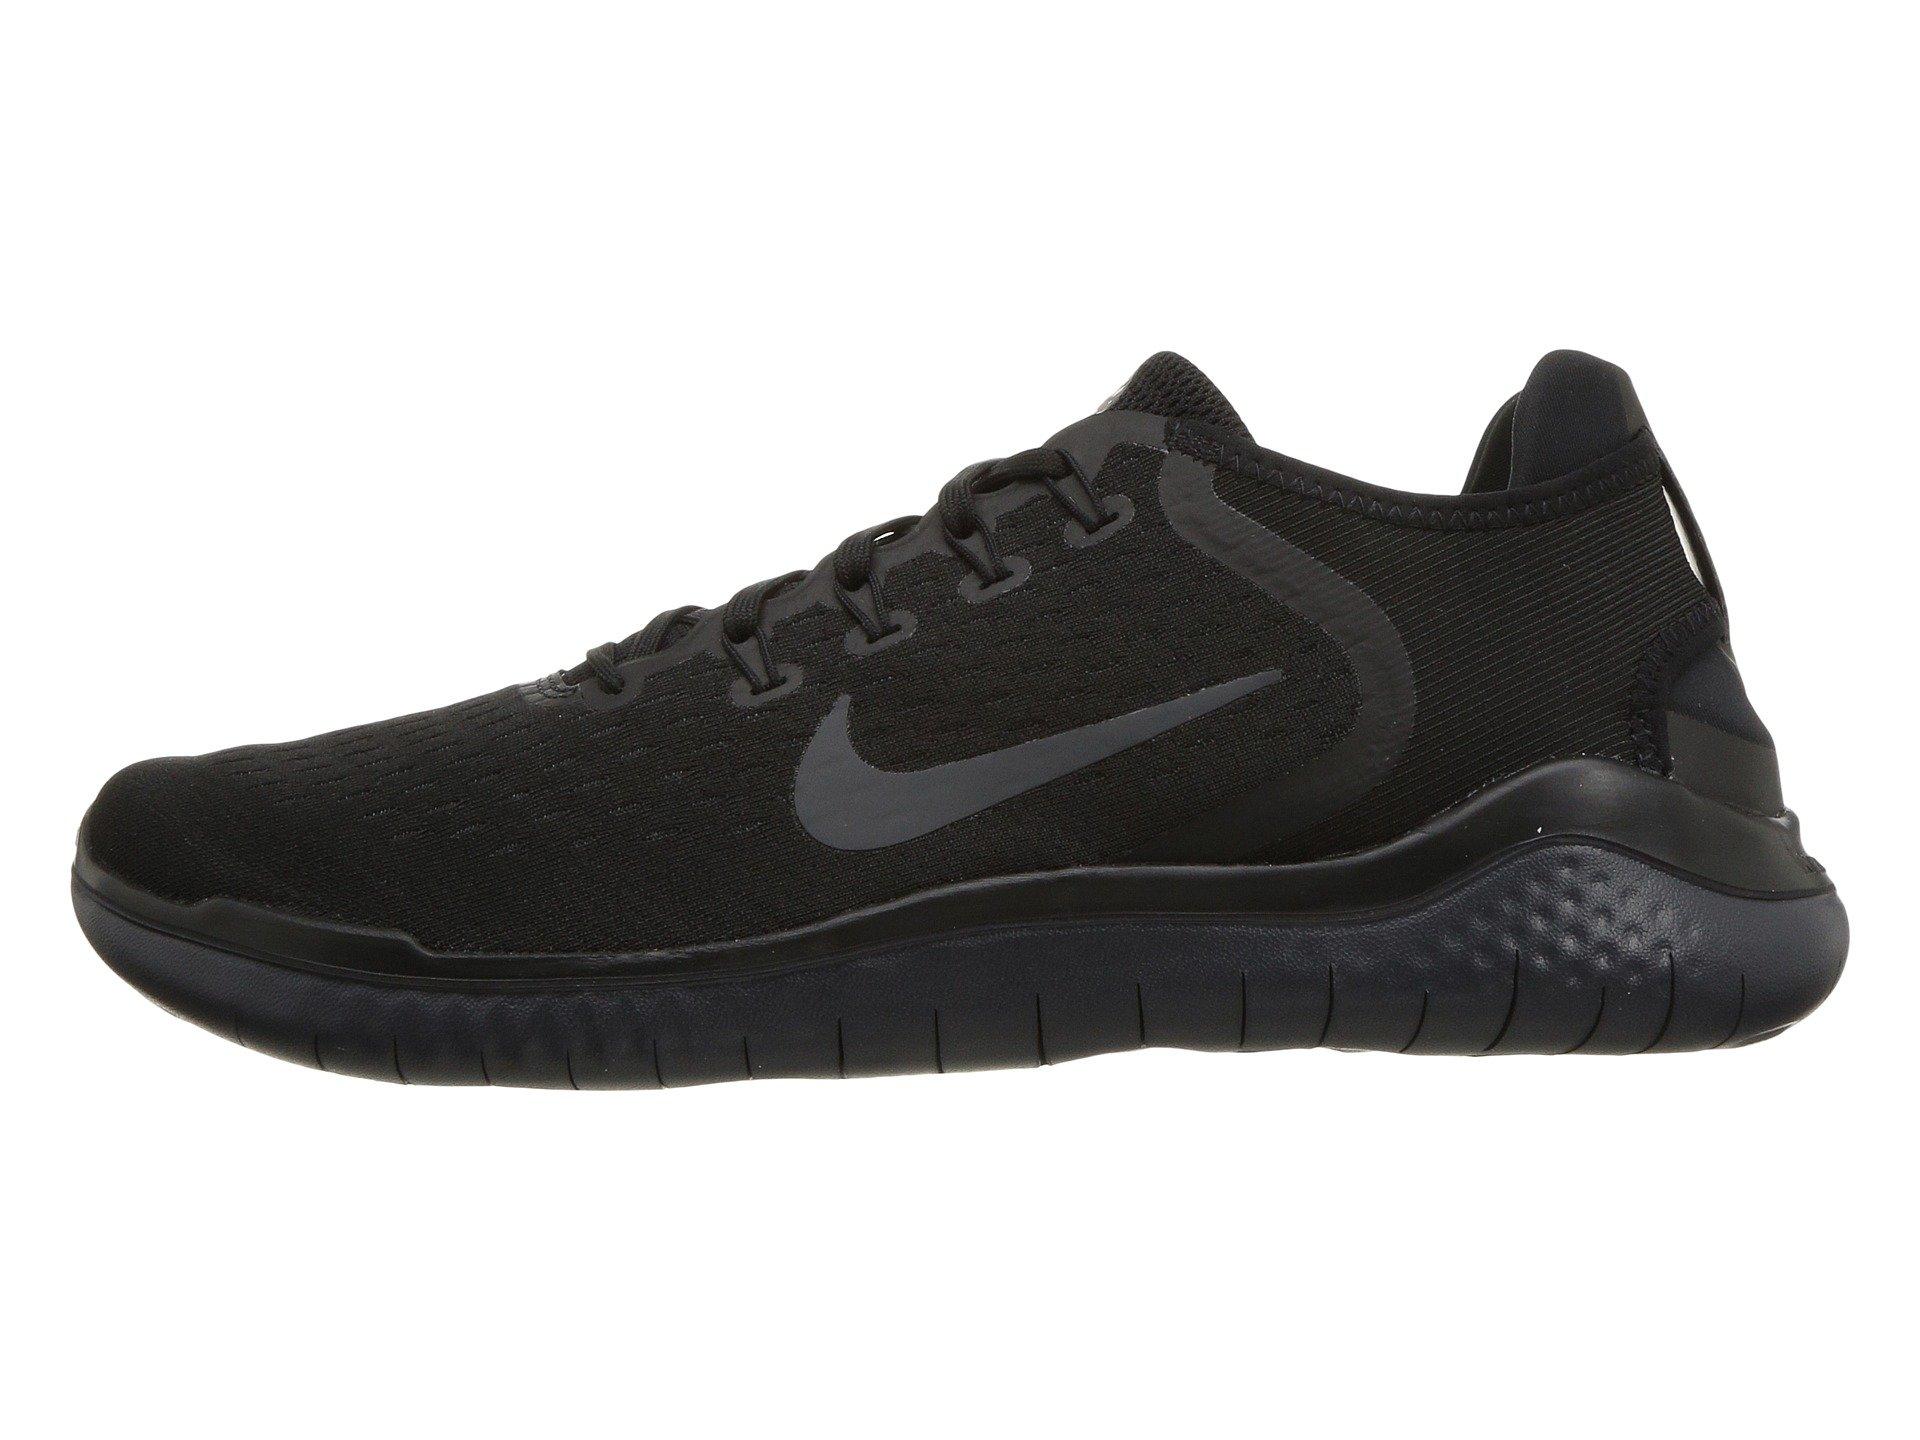 Nike Synthetic Rn (black/anthracite) Running for Men - Lyst